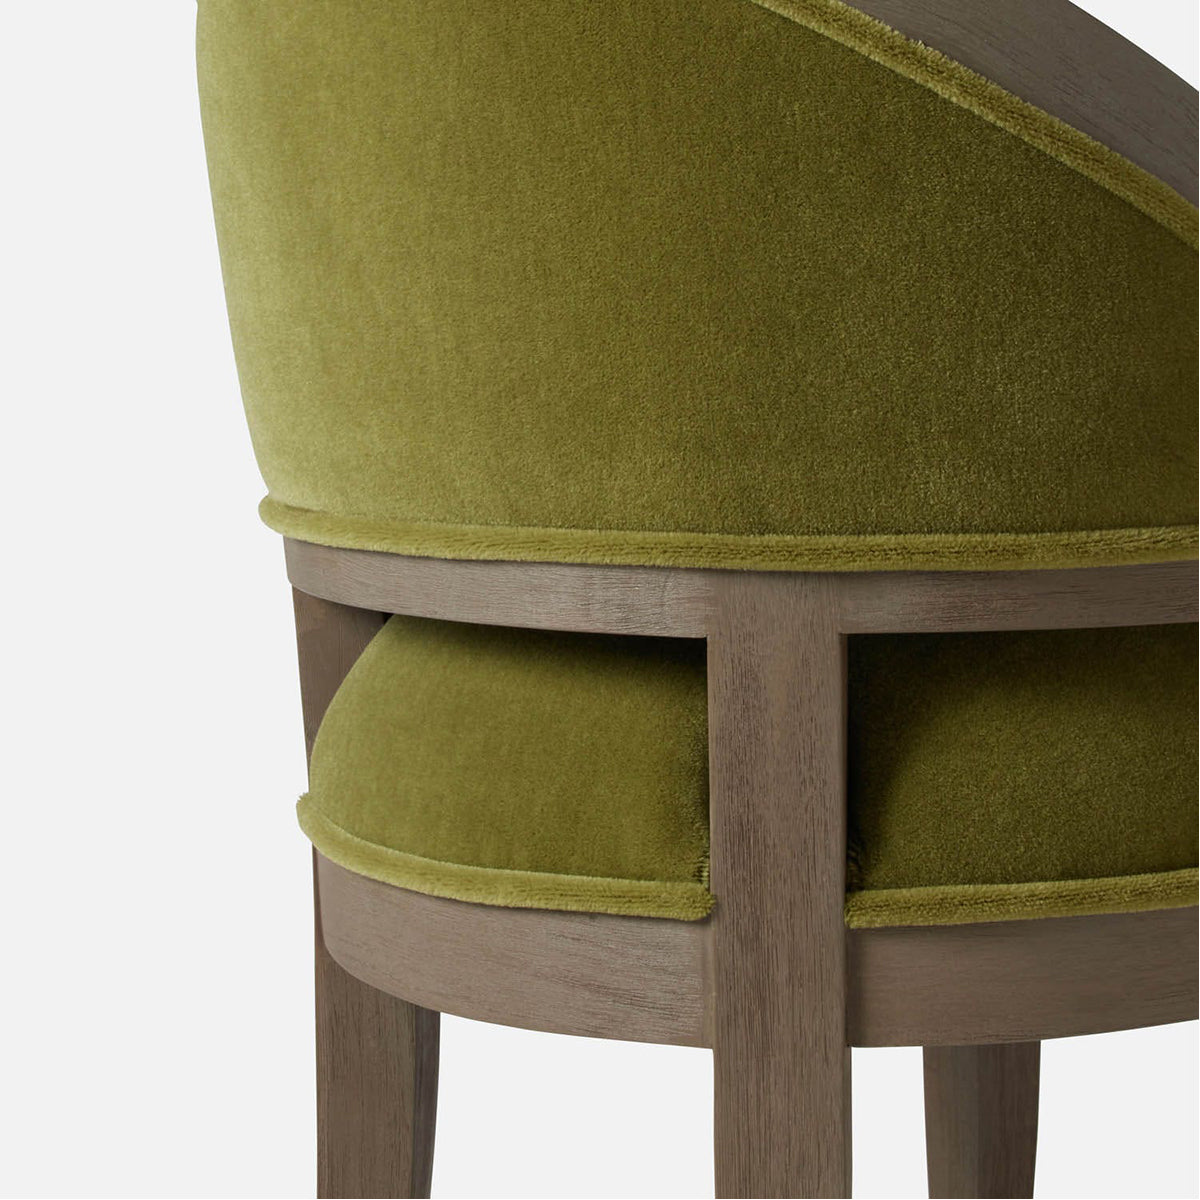 Made Goods Sylvie Curved Back Counter Stool in Weser Fabric